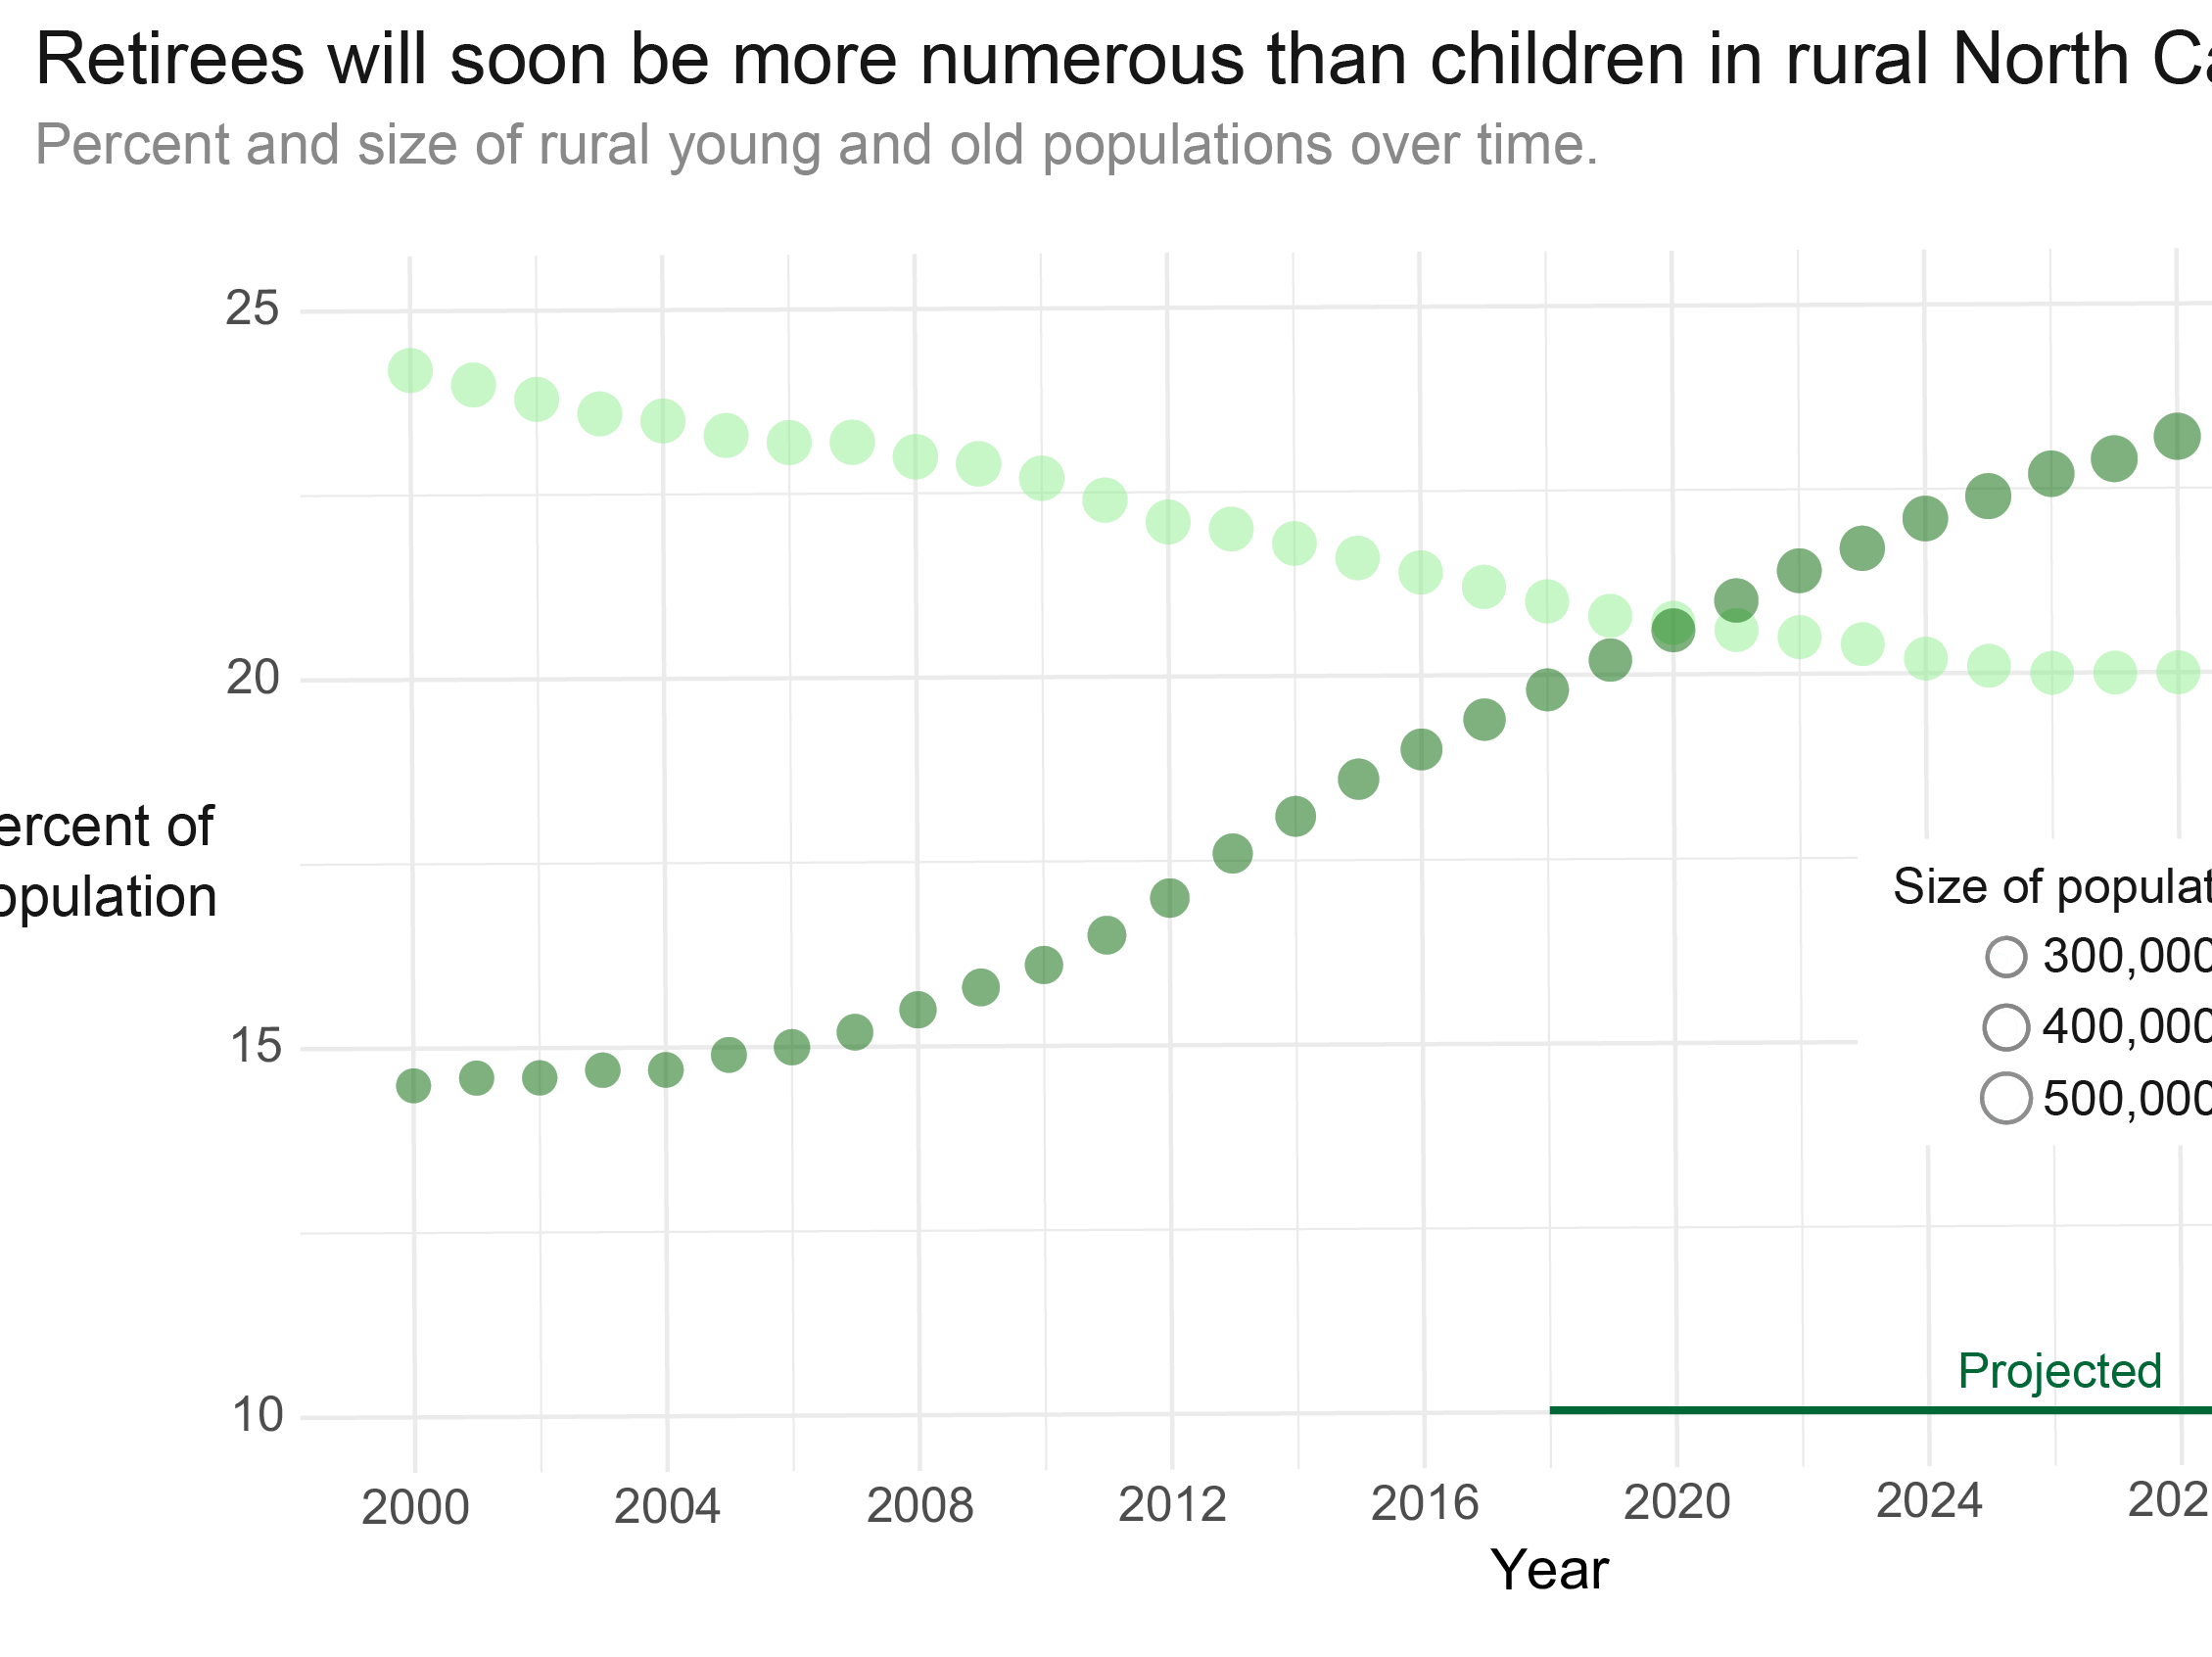 Rural residents who are 65 or older are increasing in both number and proportion.